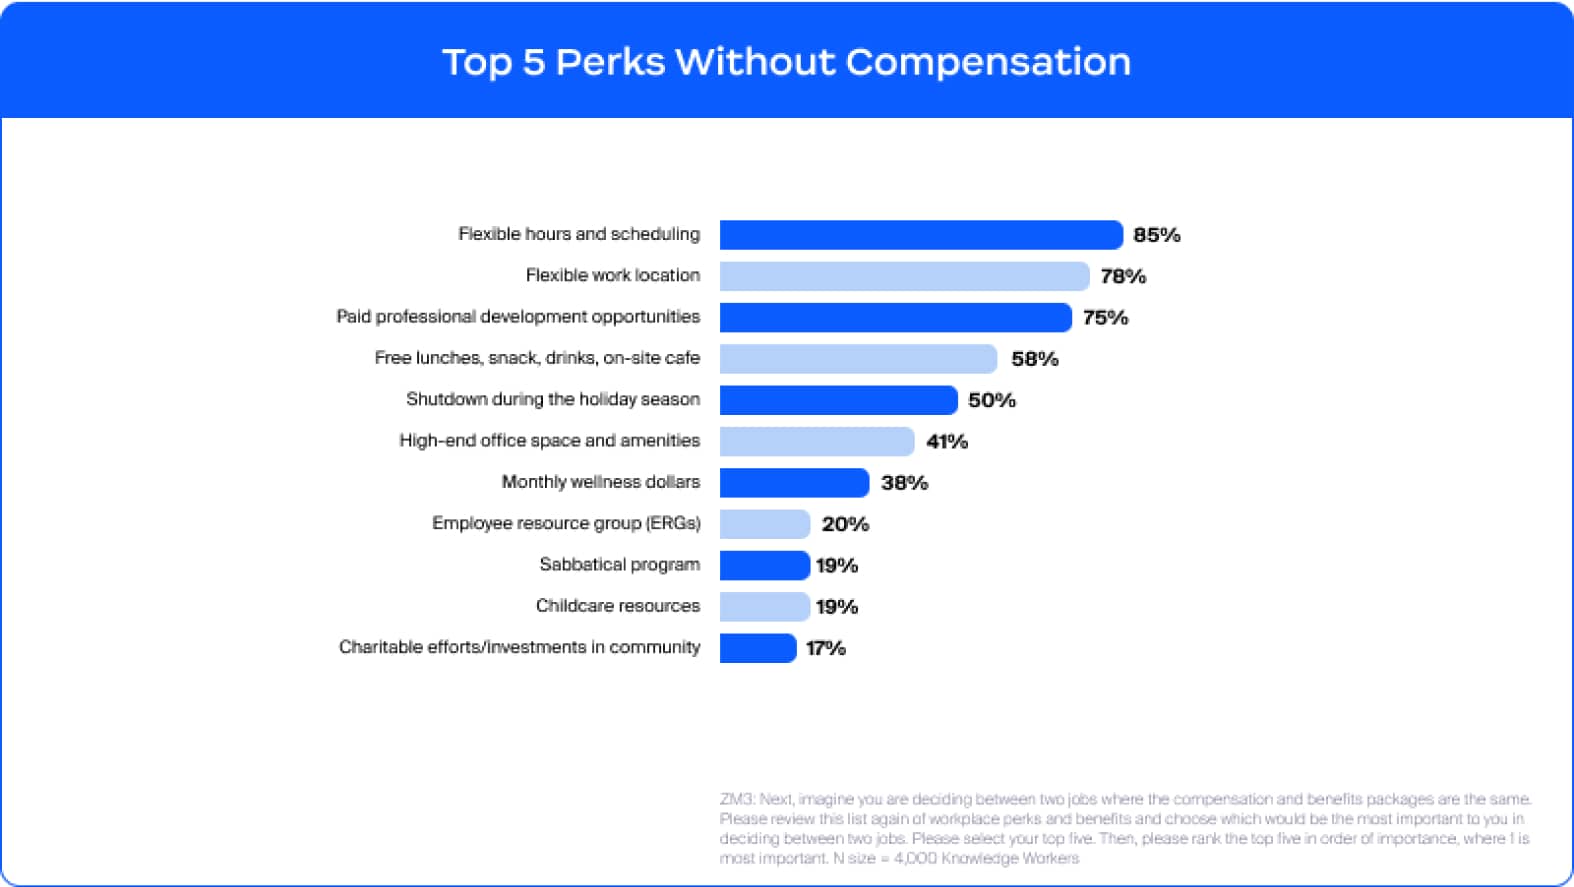 Top 5 Perks Without Compensation